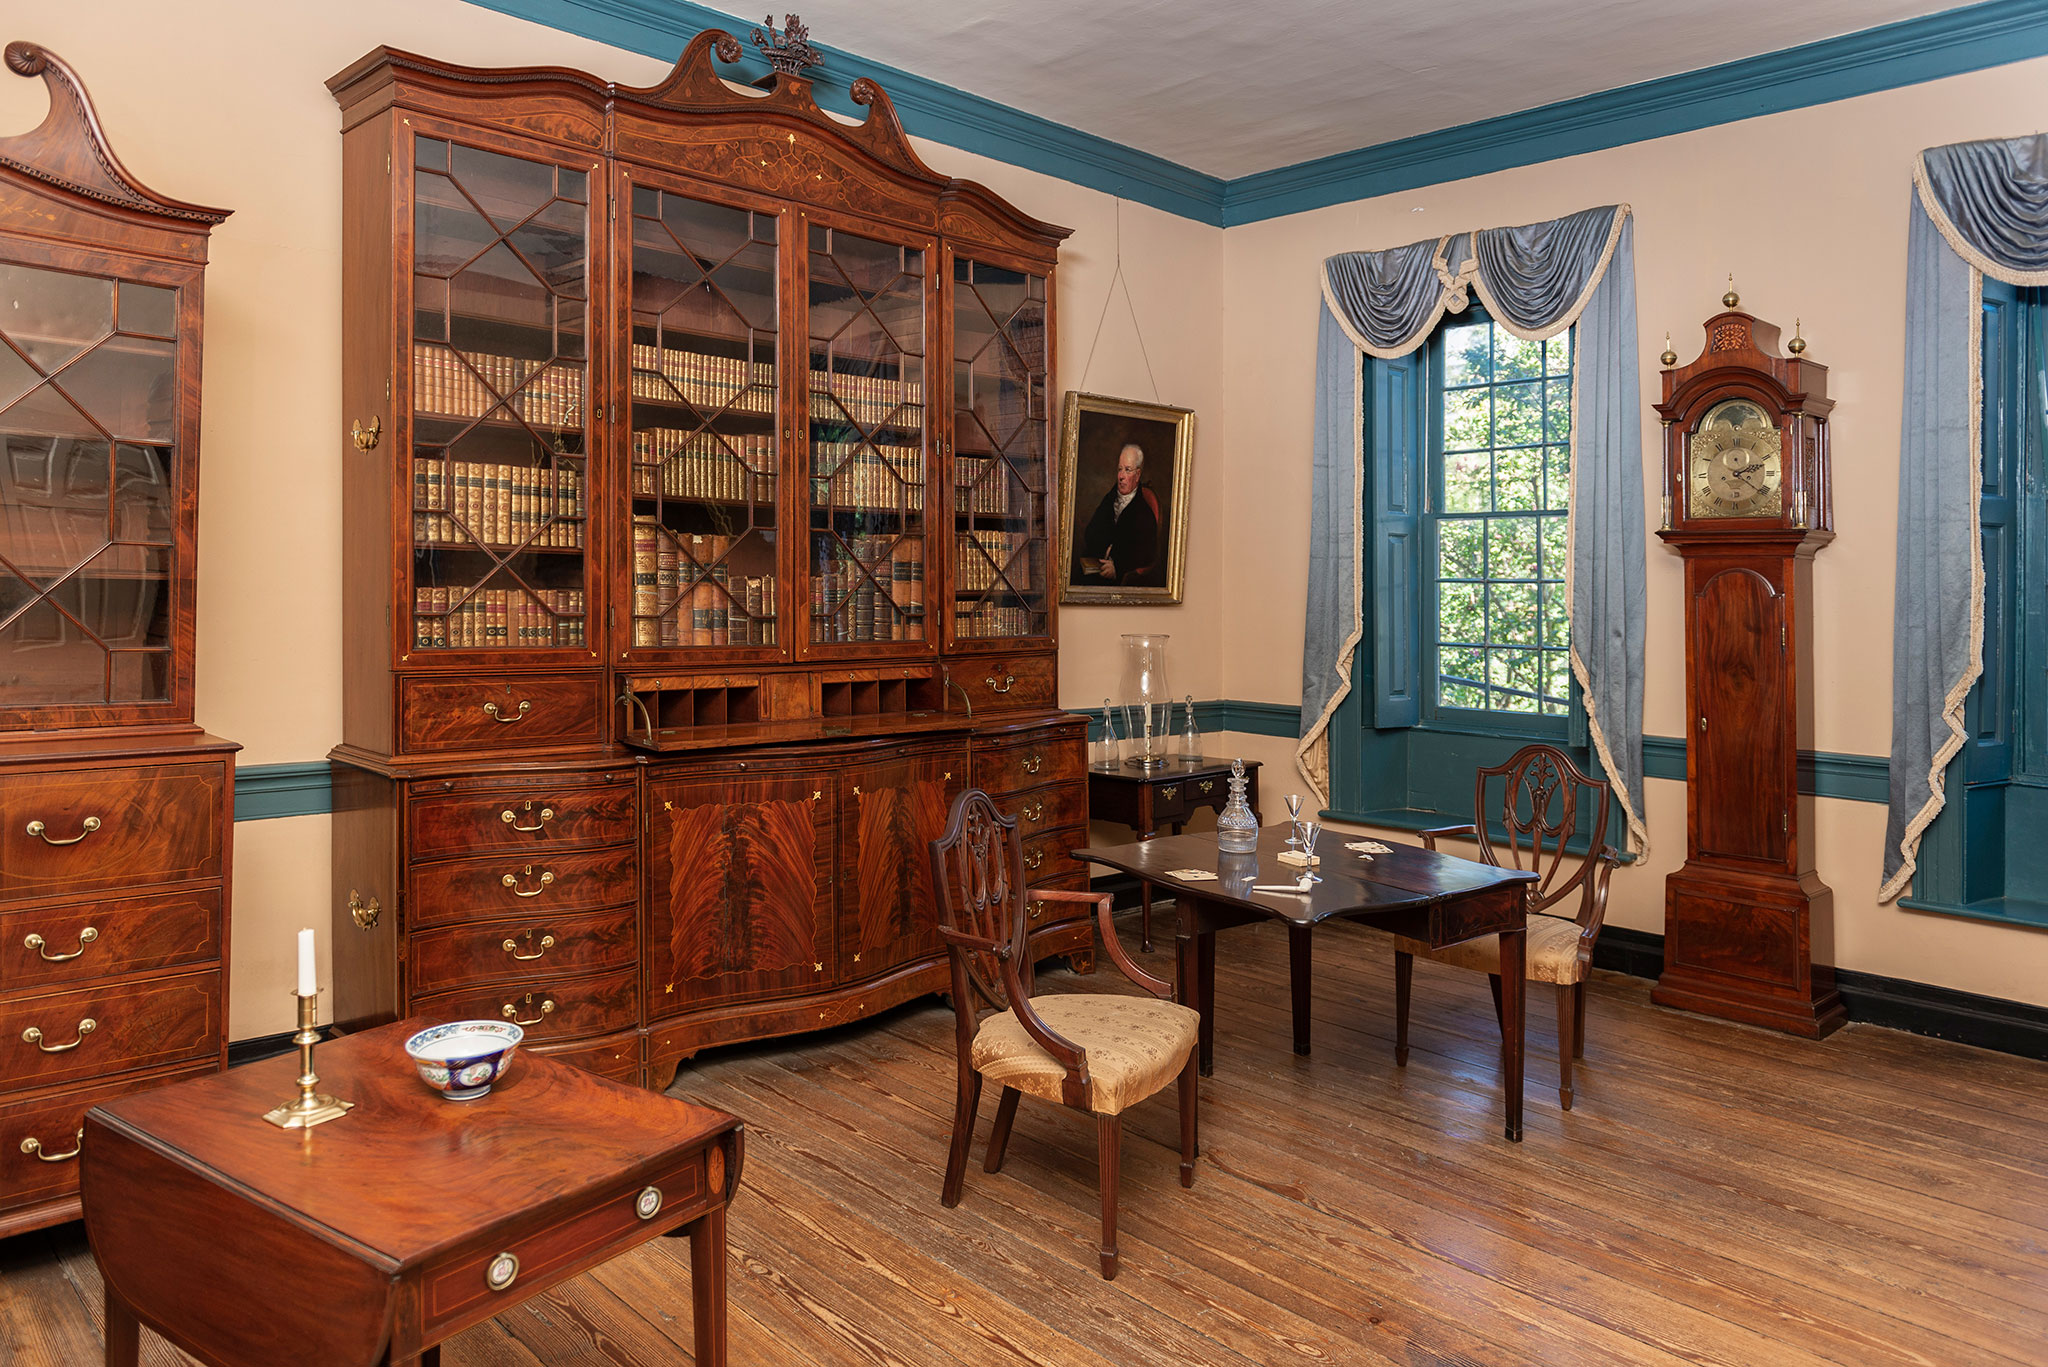 Exclusive Furniture Tour: A Closer Look at Enslaved Craftsmanship with Chief of Collections Jennifer McCormick and Curator of History Chad Stewart